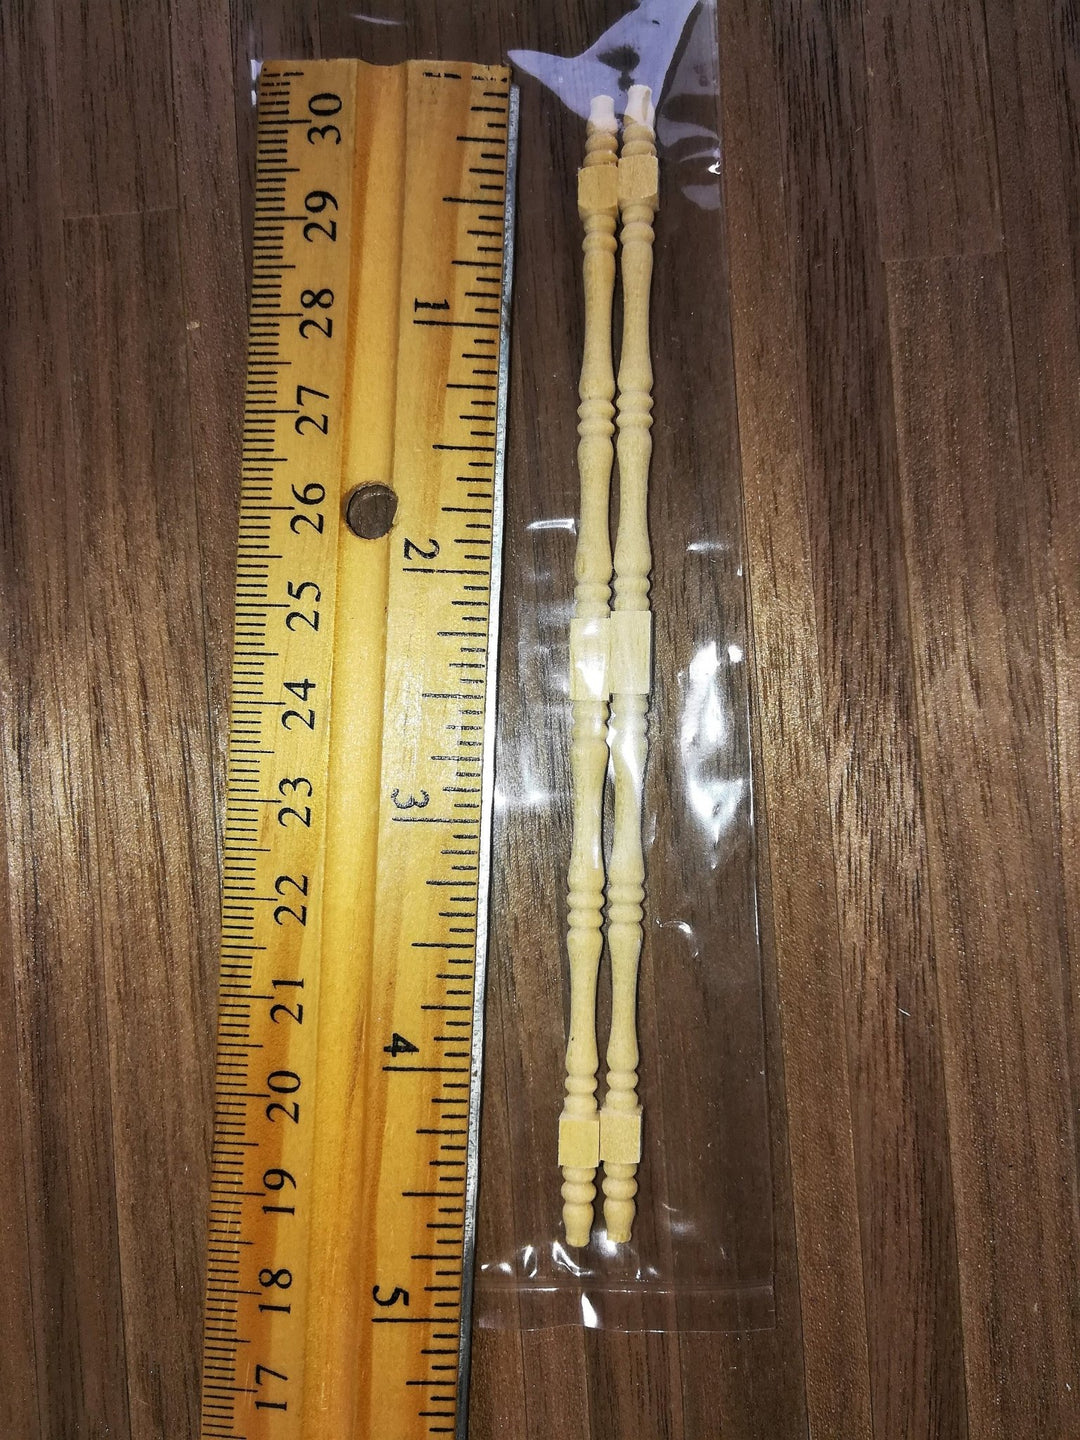 Dollhouse Miniature Spindles Tall Wood for Building 2 Pieces 1:12 Scale 4 3/4" Long - Miniature Crush